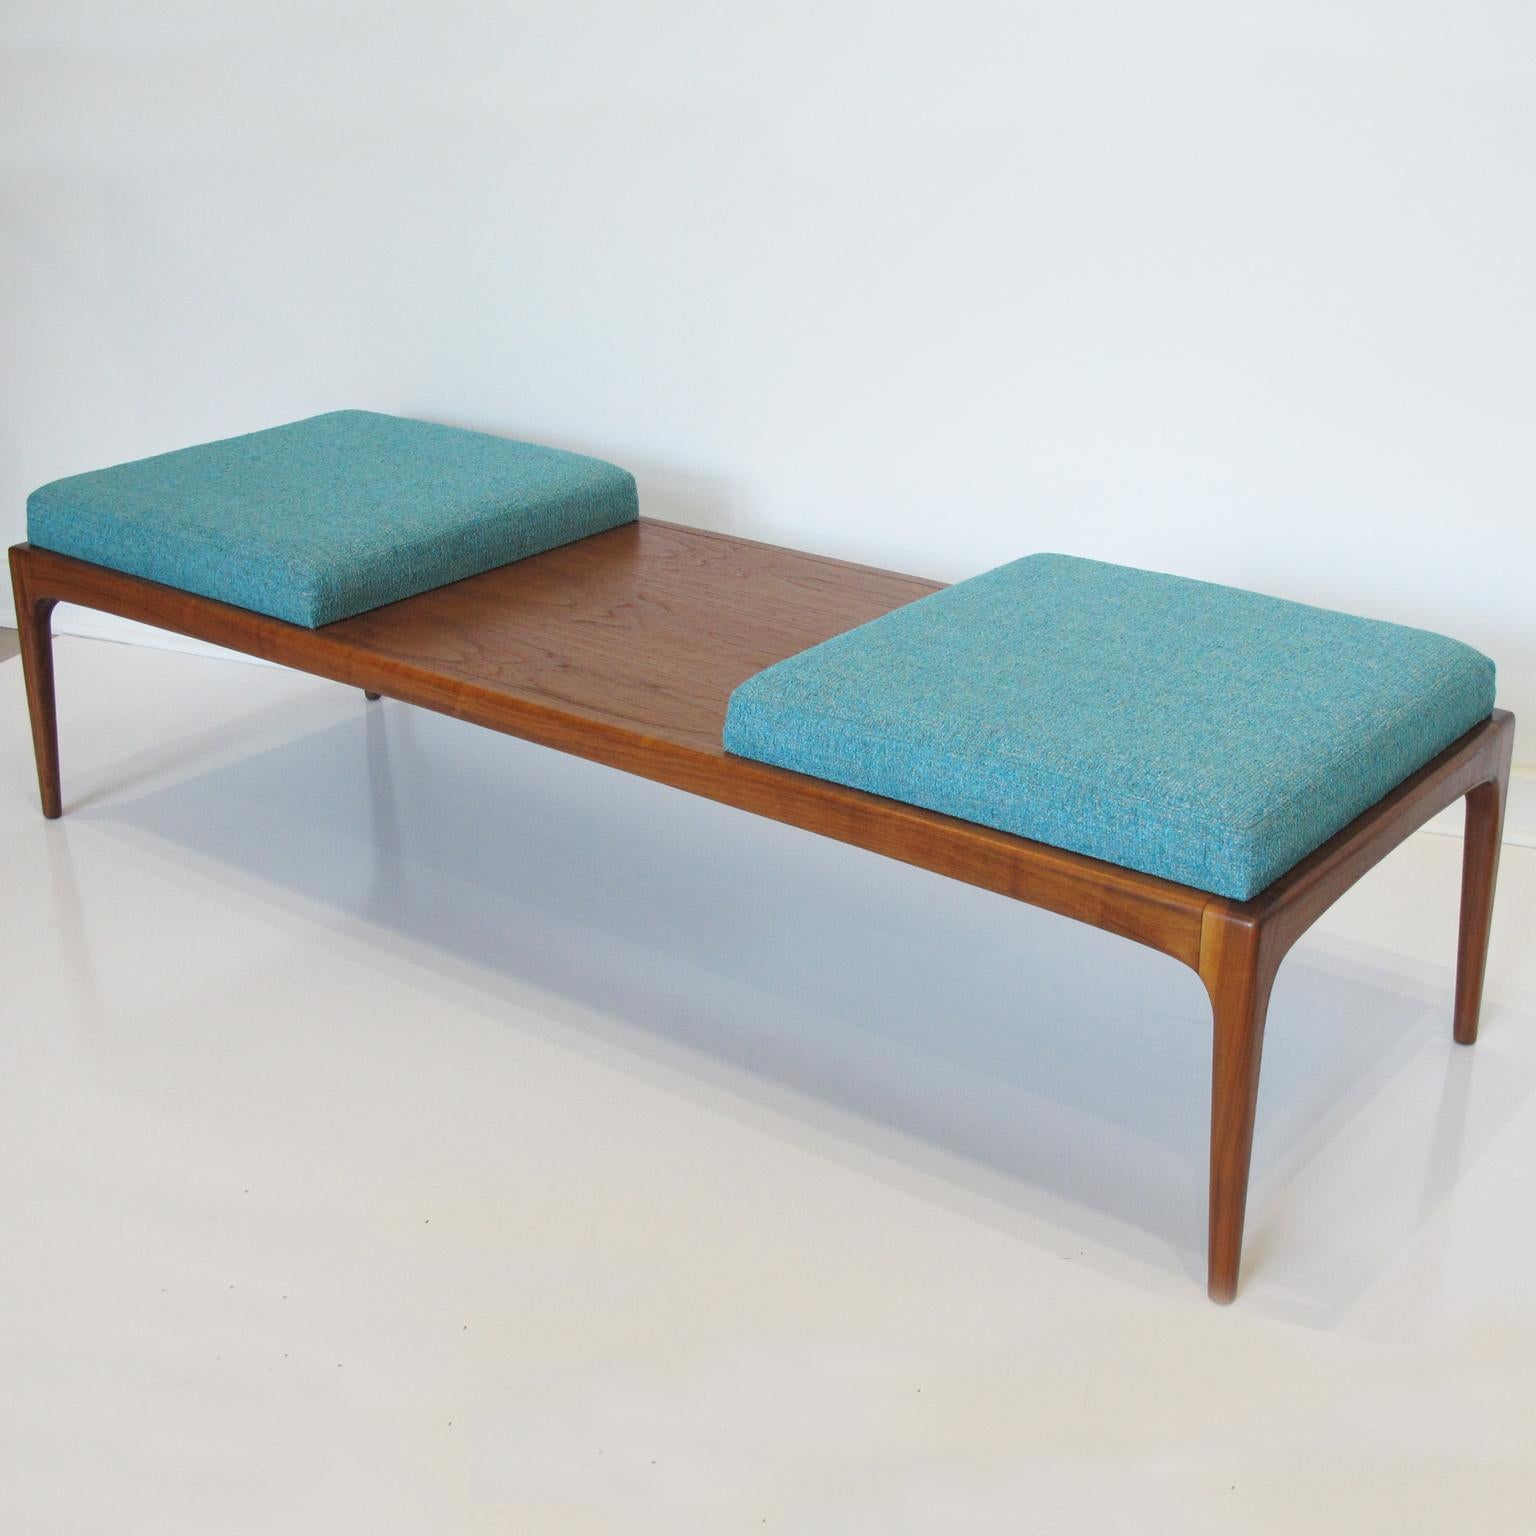 Extra long Mid-Century Modernist bench newly upholstered, designed by Lane Furniture. Walnut base fully restored. This lovely bench consists of three sections; two fabric cushion seats in stunning turquoise color with textured pattern and one walnut